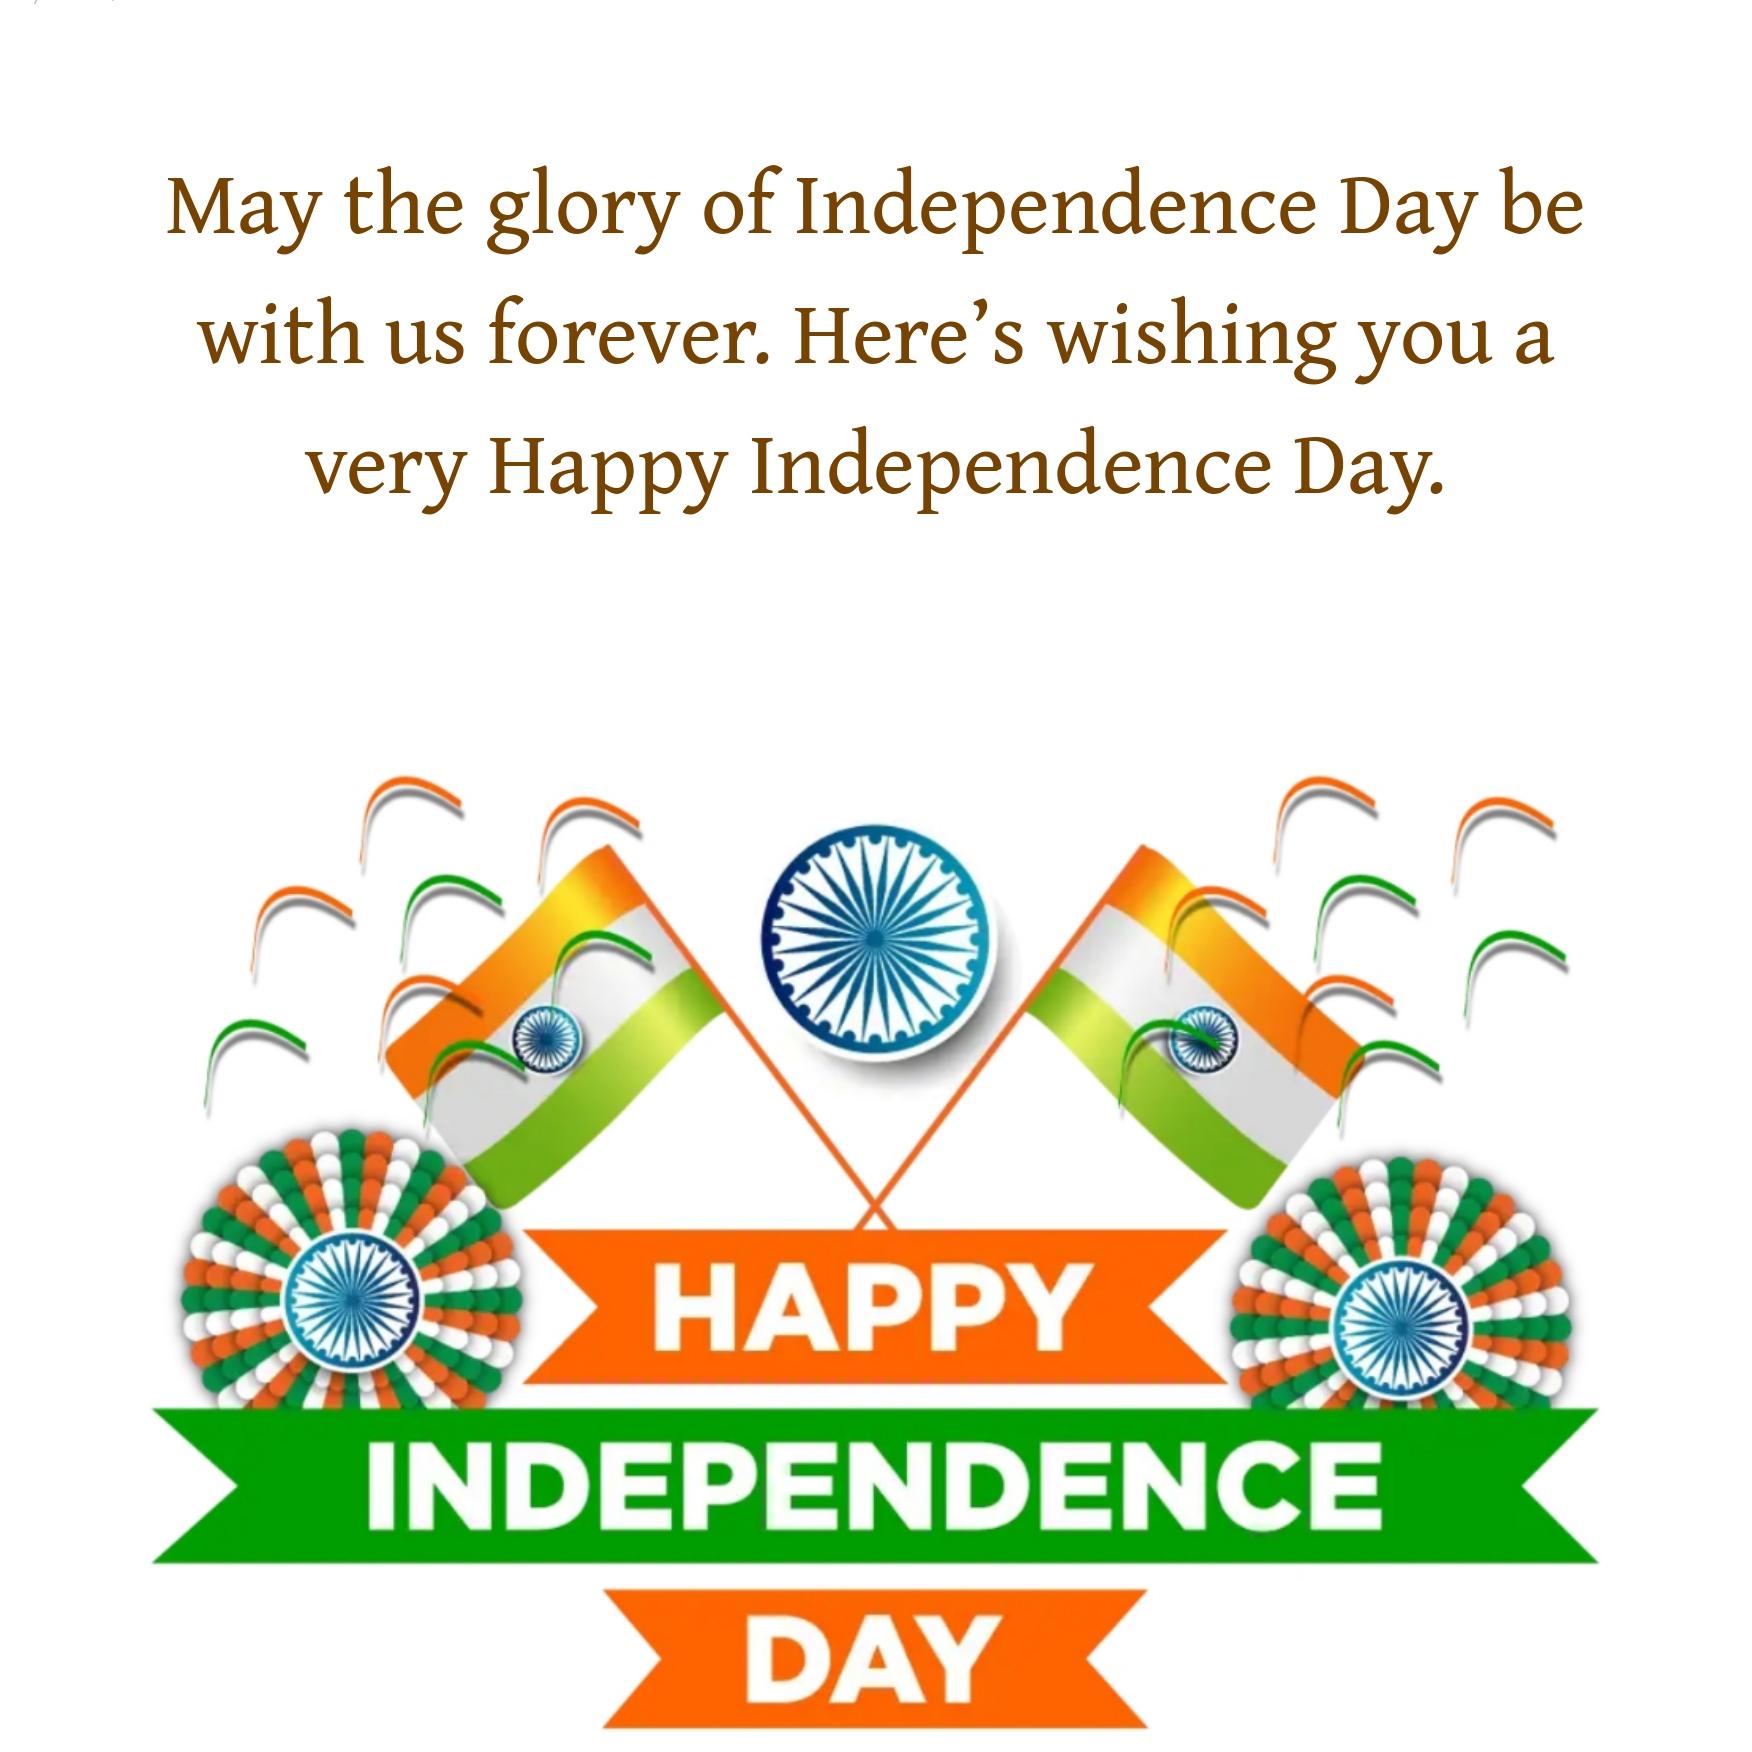 May the glory of Independence Day be with us forever